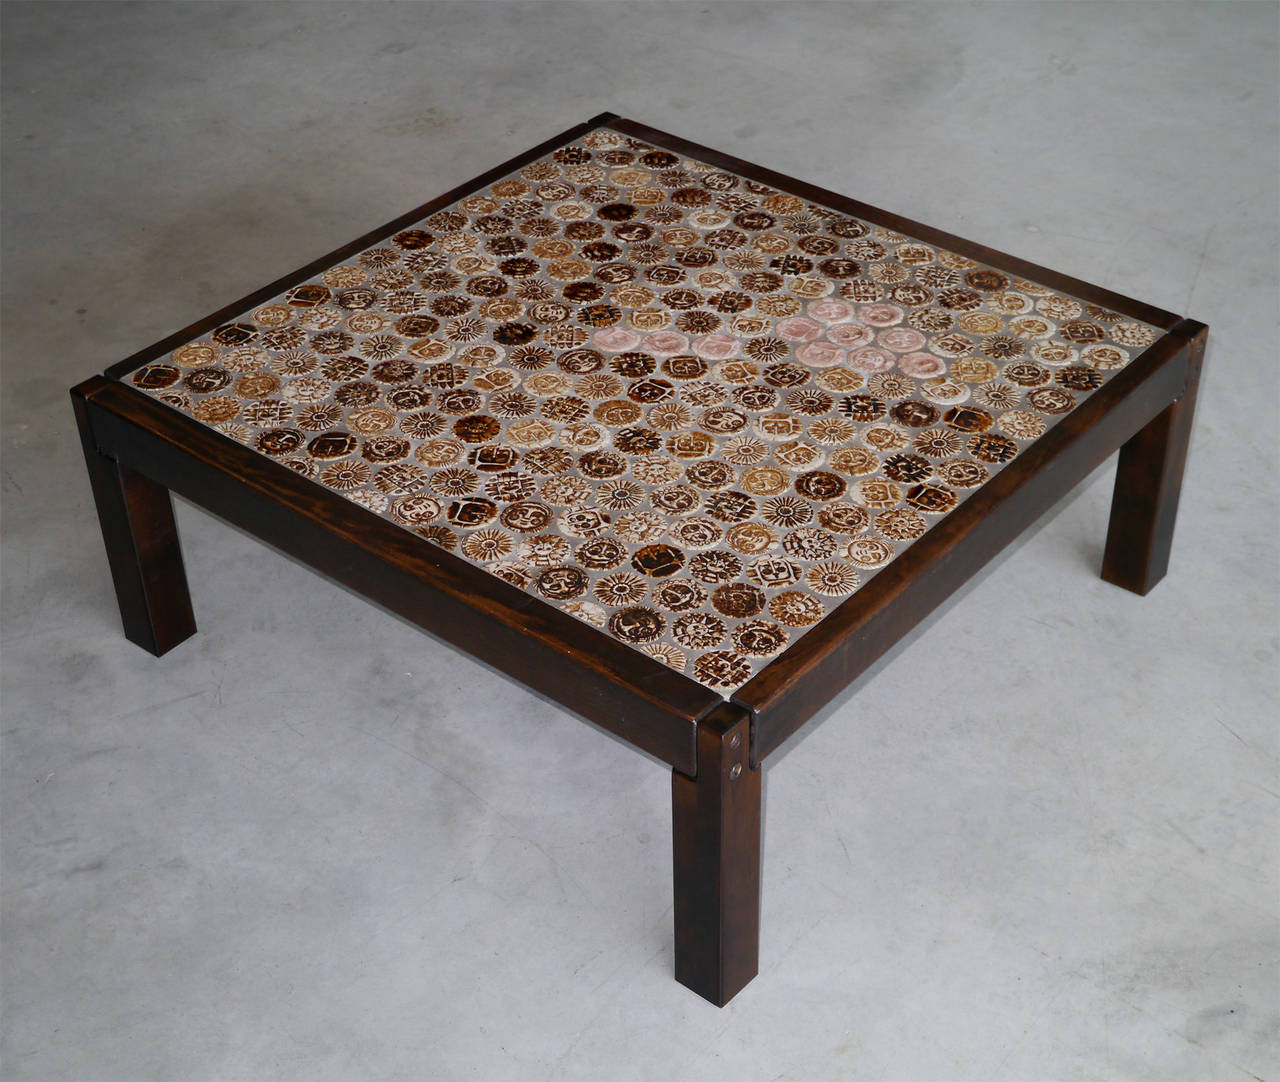 A rare squared low table from the Galaxy range.

The top table consists with numerous round tiles figuring naive faces in various shades from sand rose to warm brown and artistically inlaid in a cement basis.

Wooden frame and feet.

Signed by